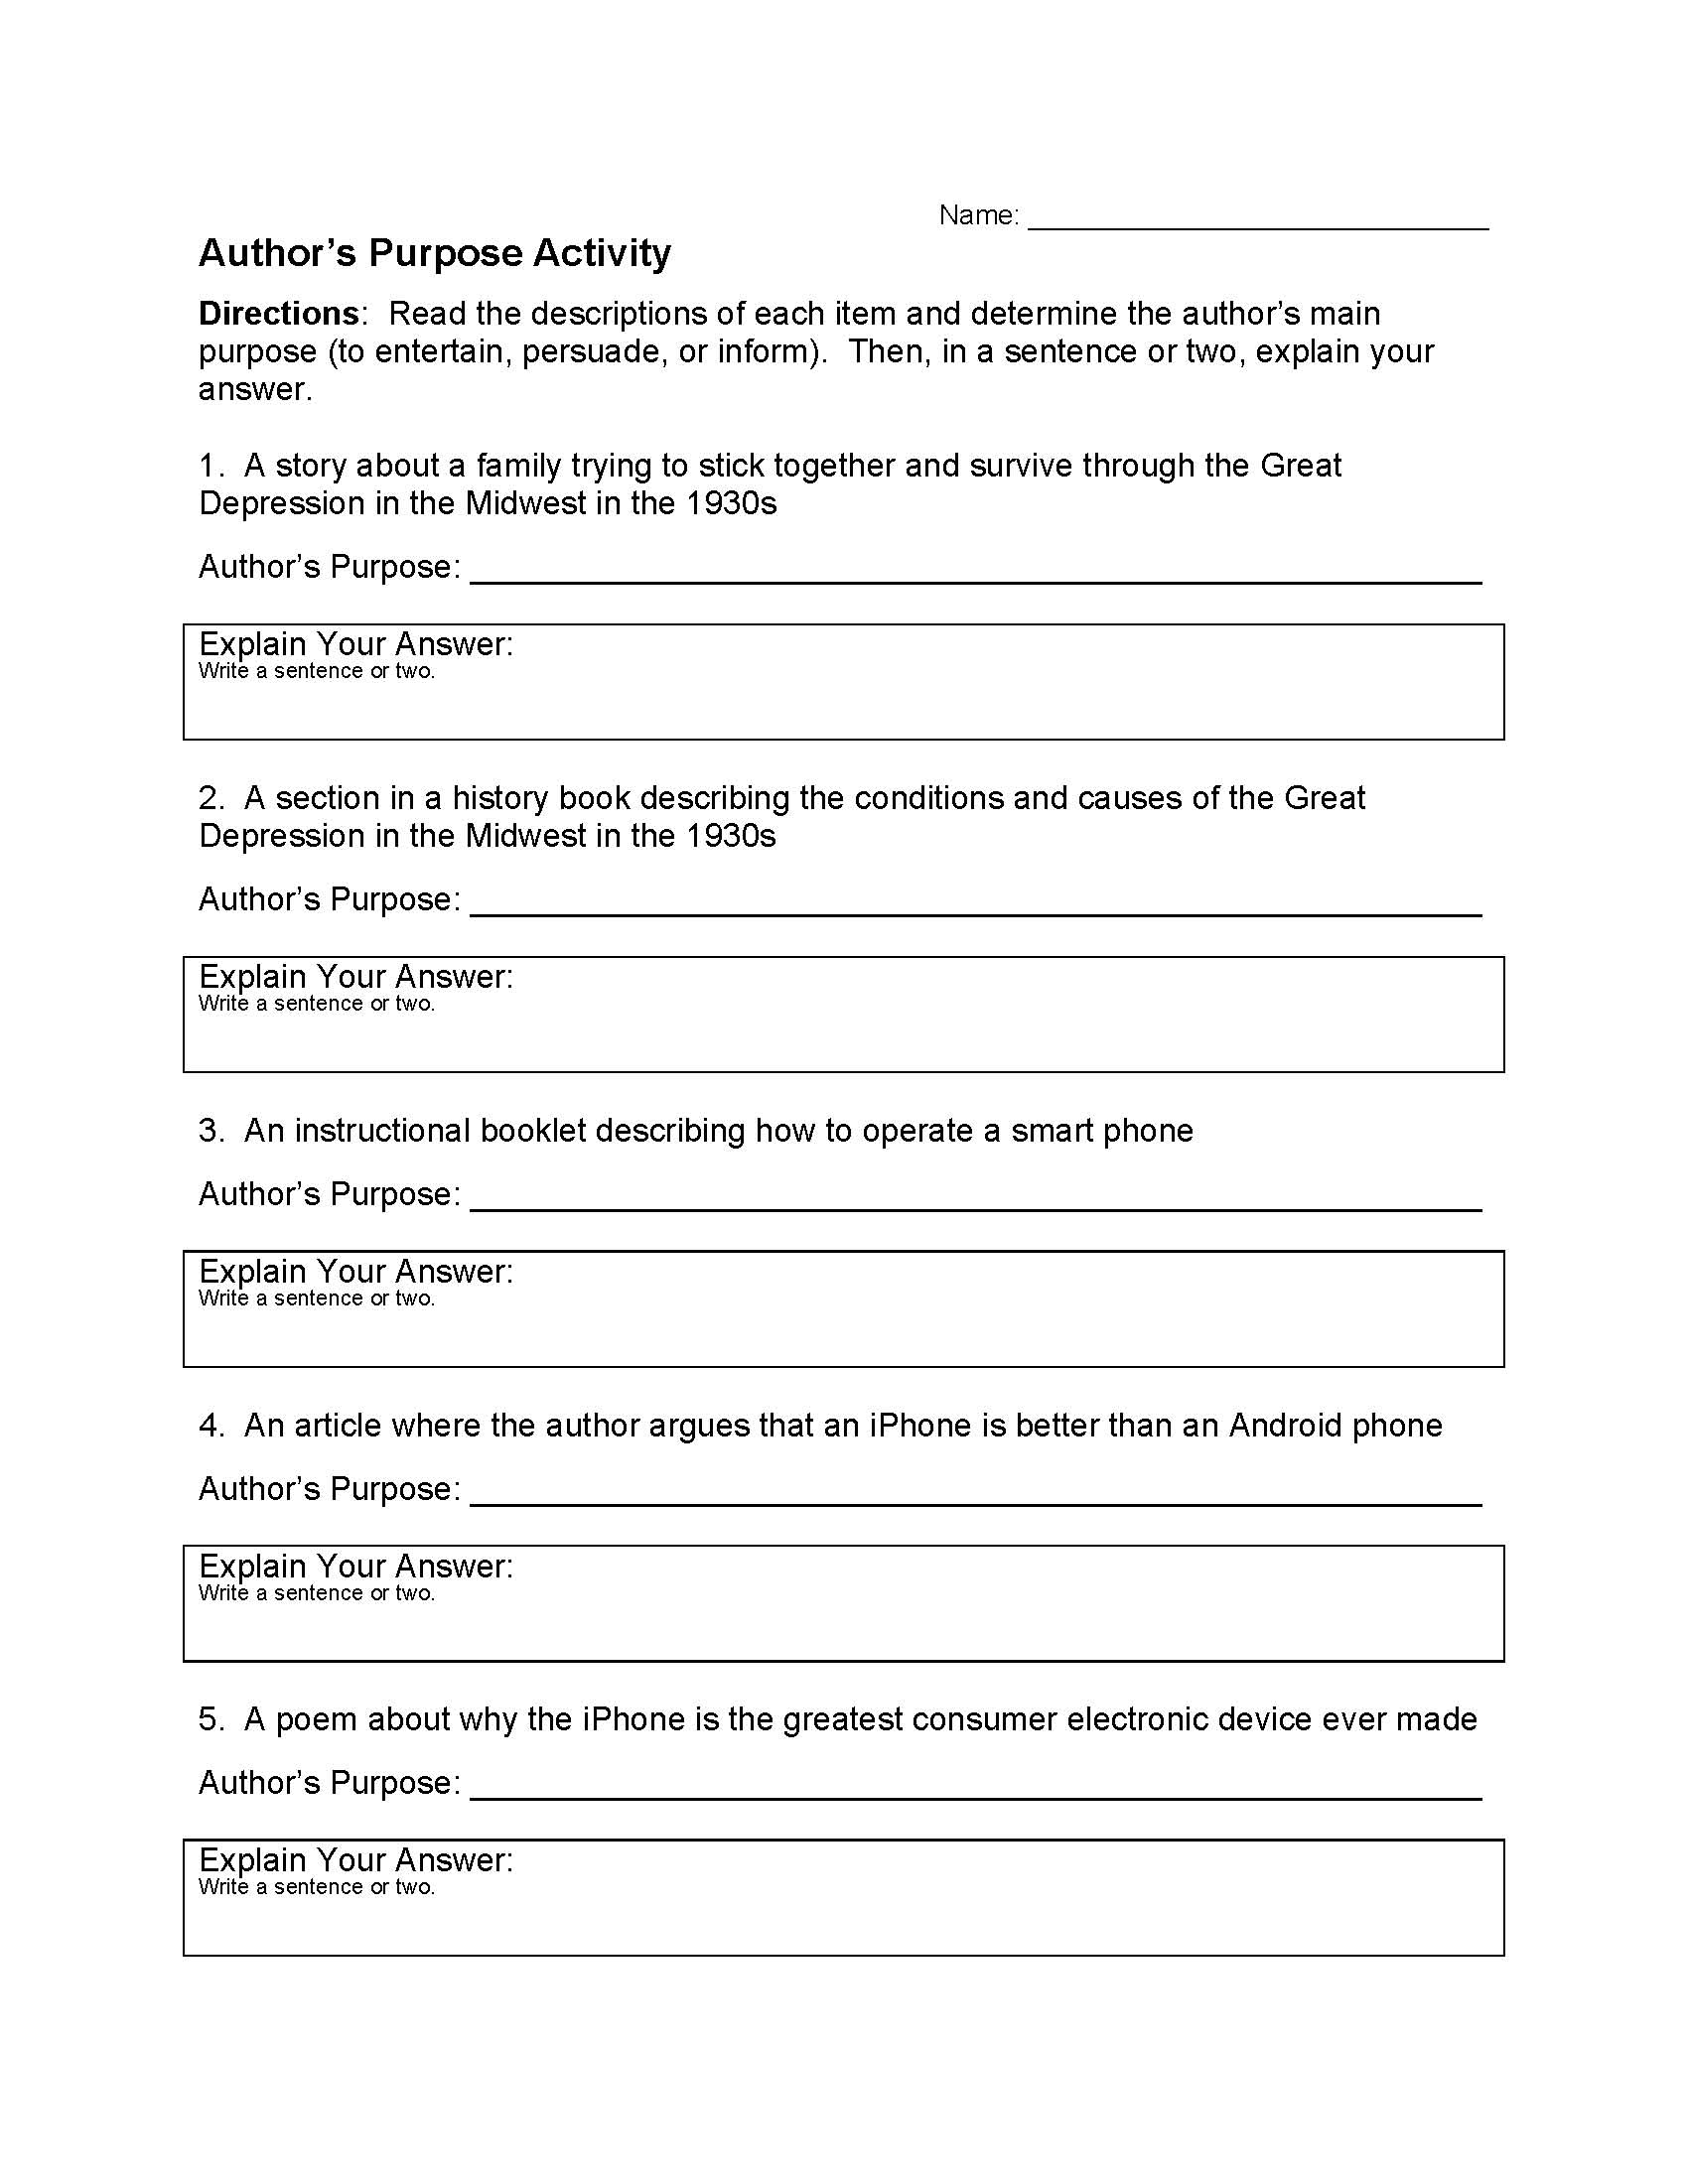 “Saint Louis Armstrong Beach” Author's Purpose Worksheet & Word Search